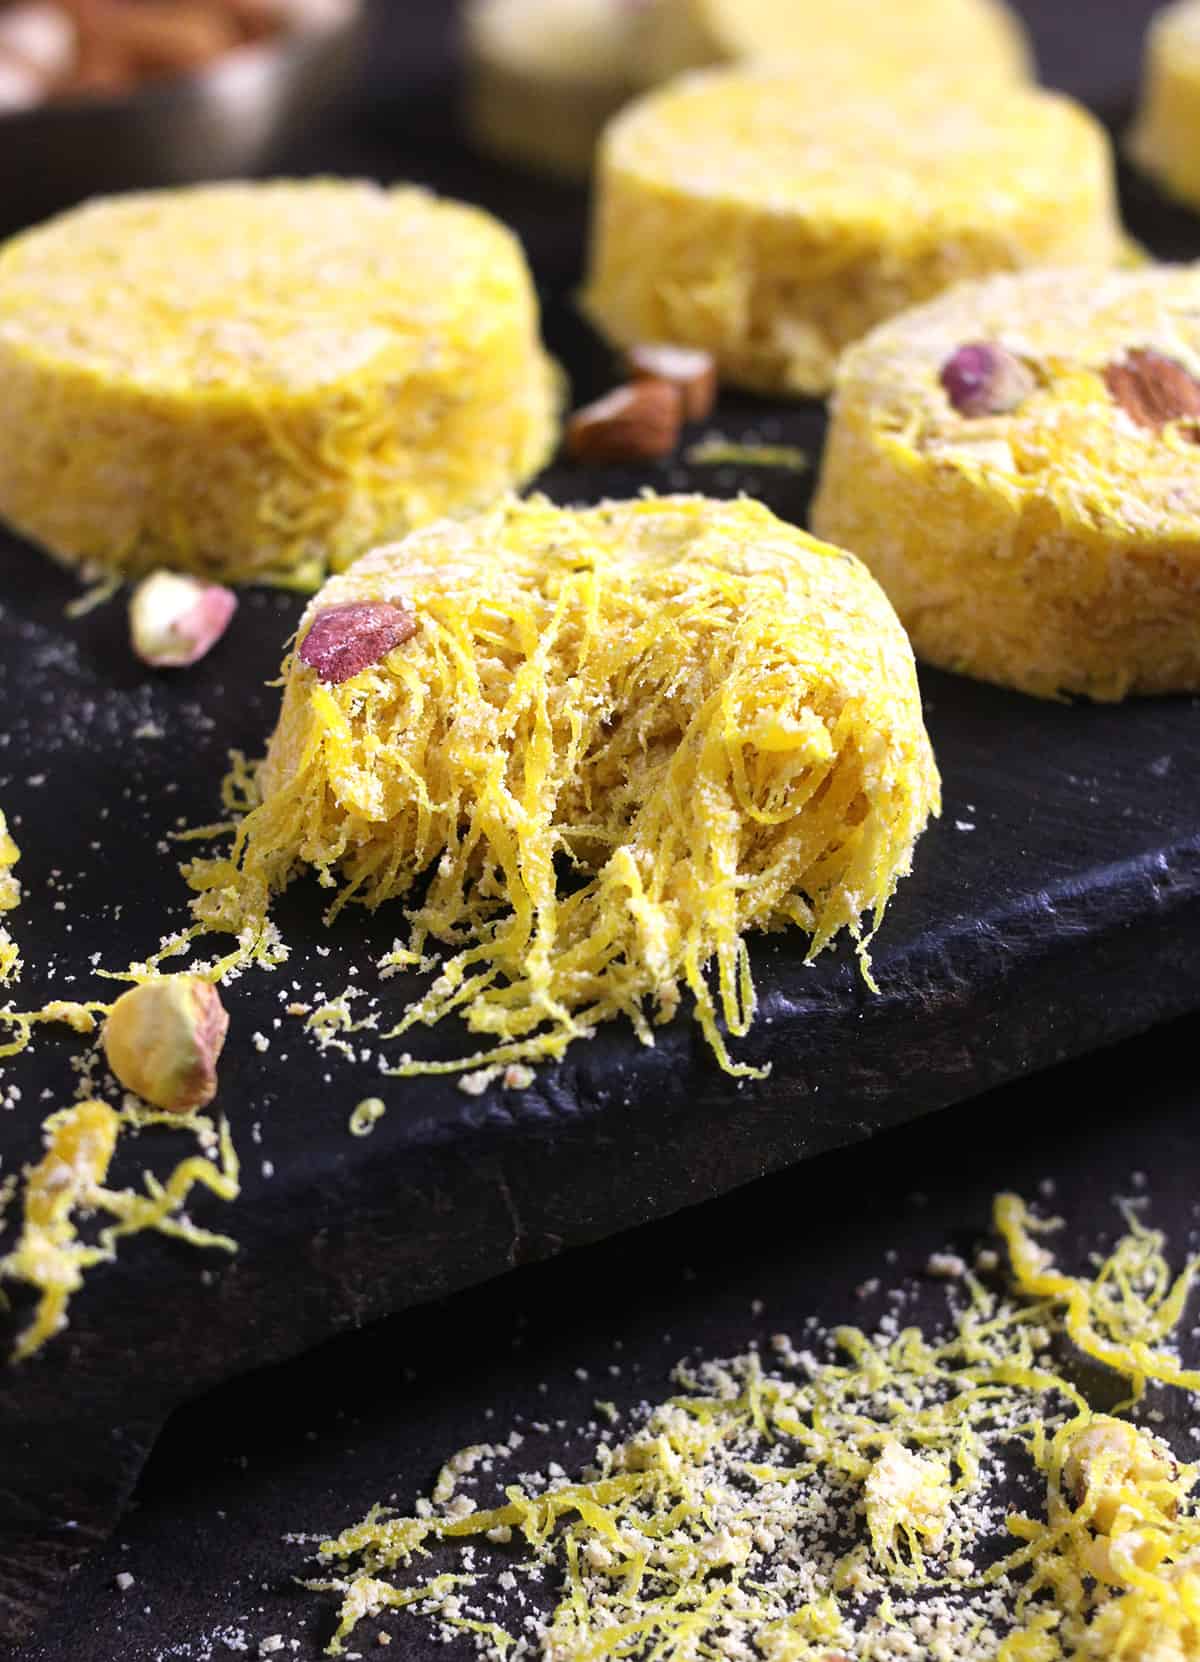 Best homemade soan papdi recipe - pineapple flavored for Diwali, Holidays 